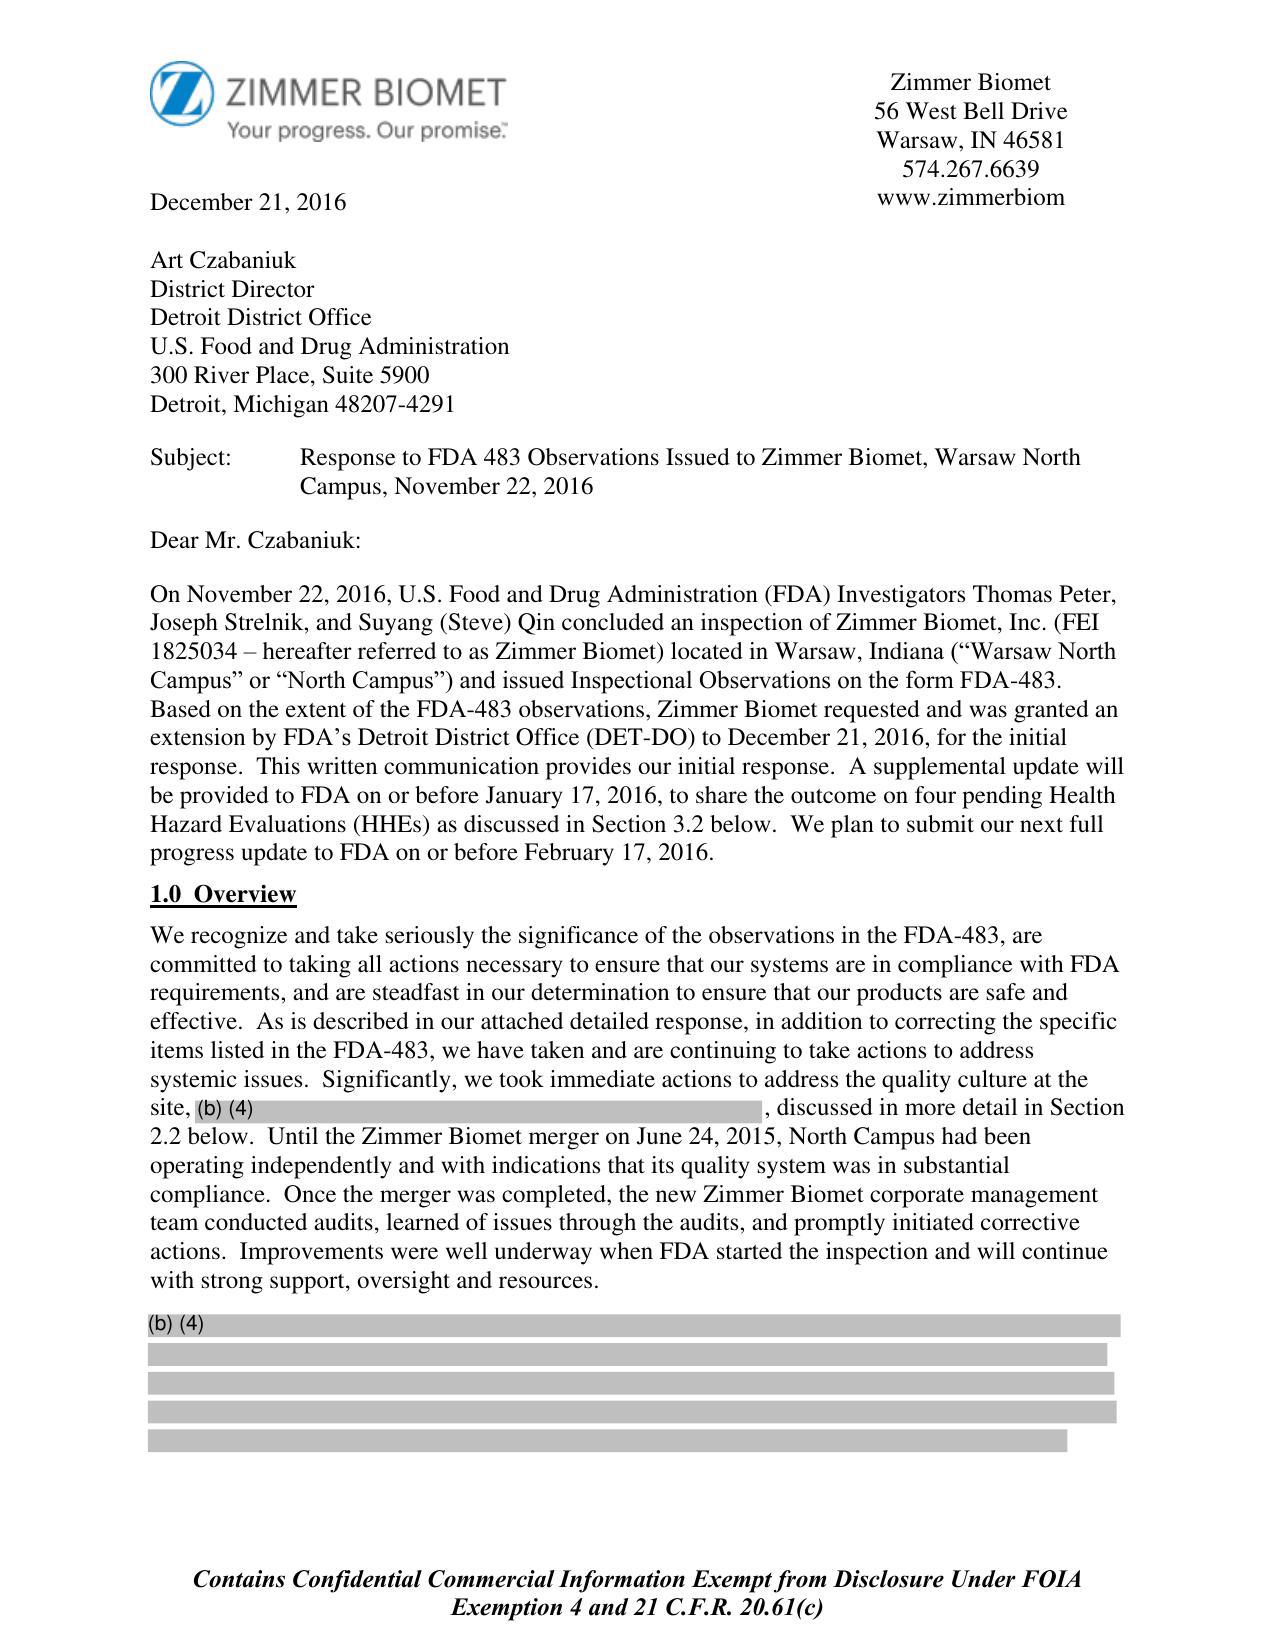 response-to-fda-483-observations-issued-to-zimmer-biomet-warsaw-north-campus-november-22-2016.pdf